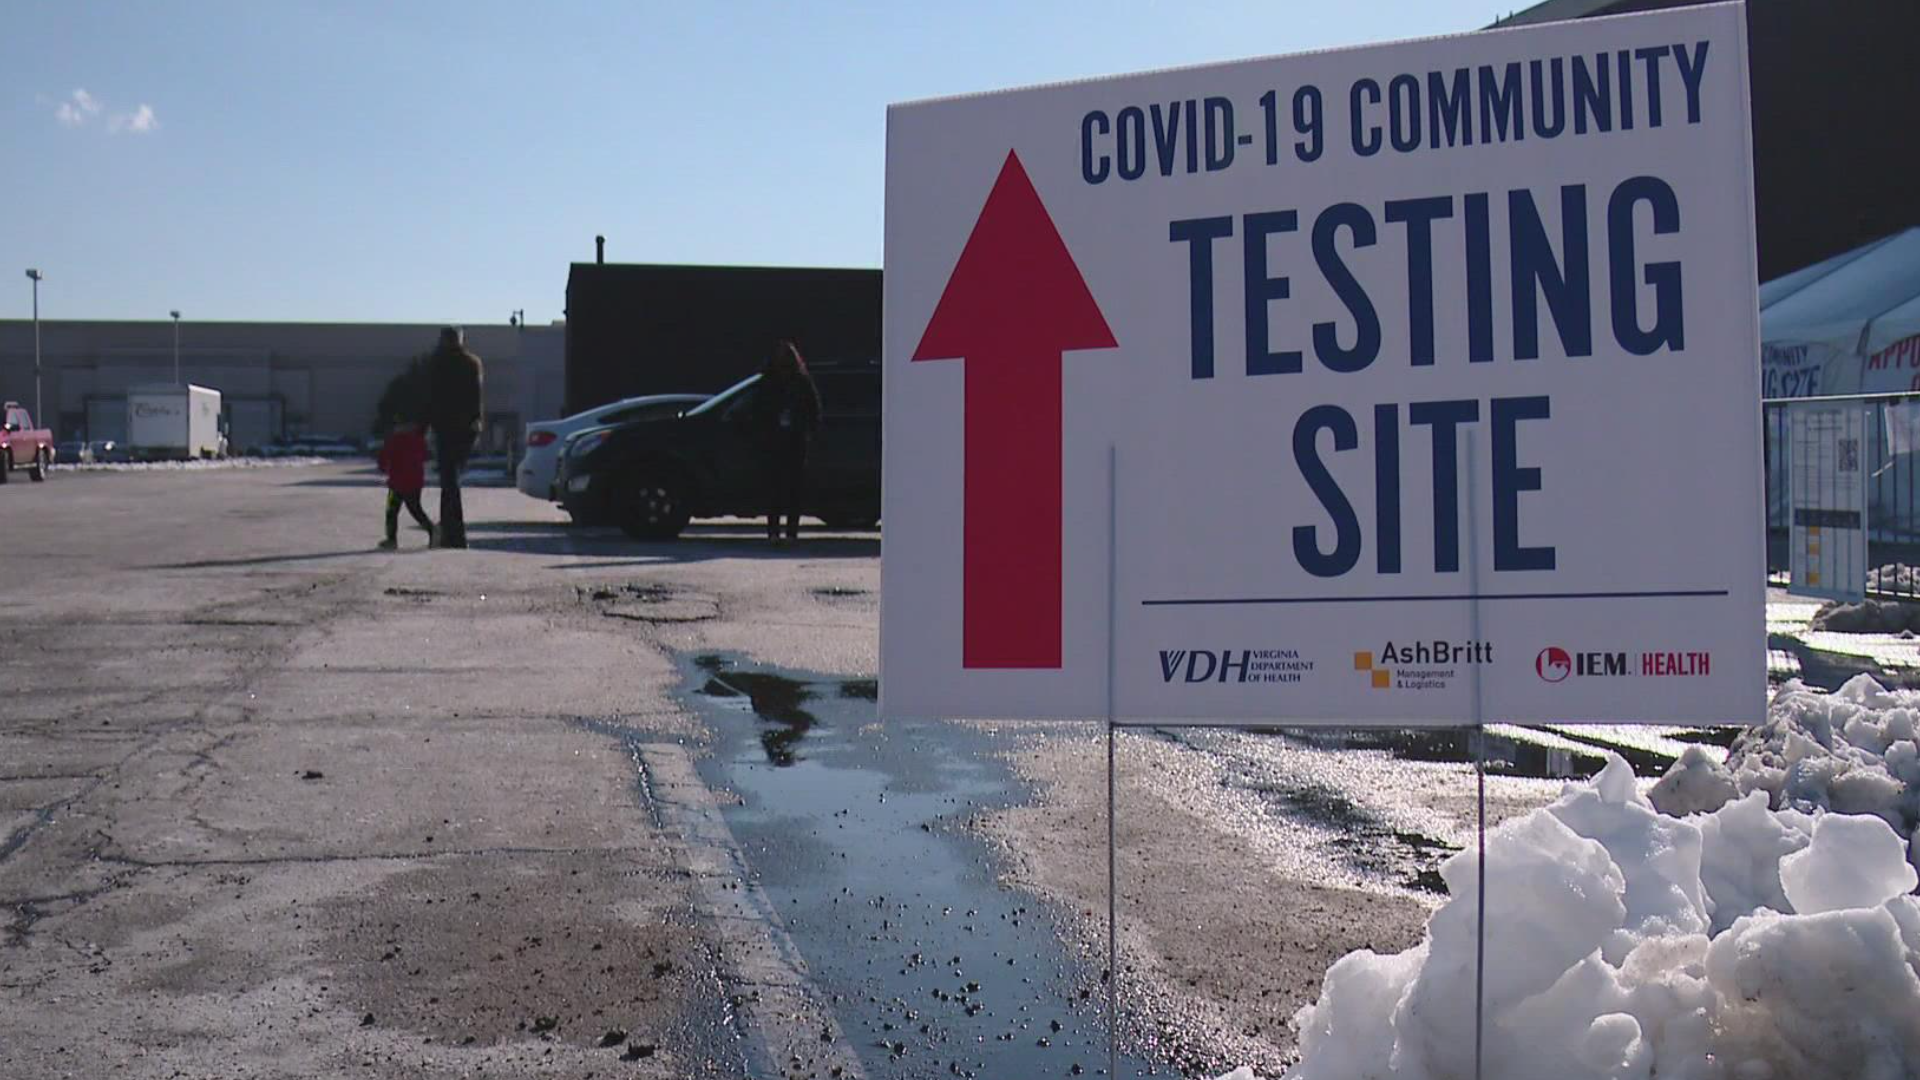 A few hundred people were tested at the Norfolk CTC on Monday, once the snow melted a bit. Many people were still waiting to get test results from last week.